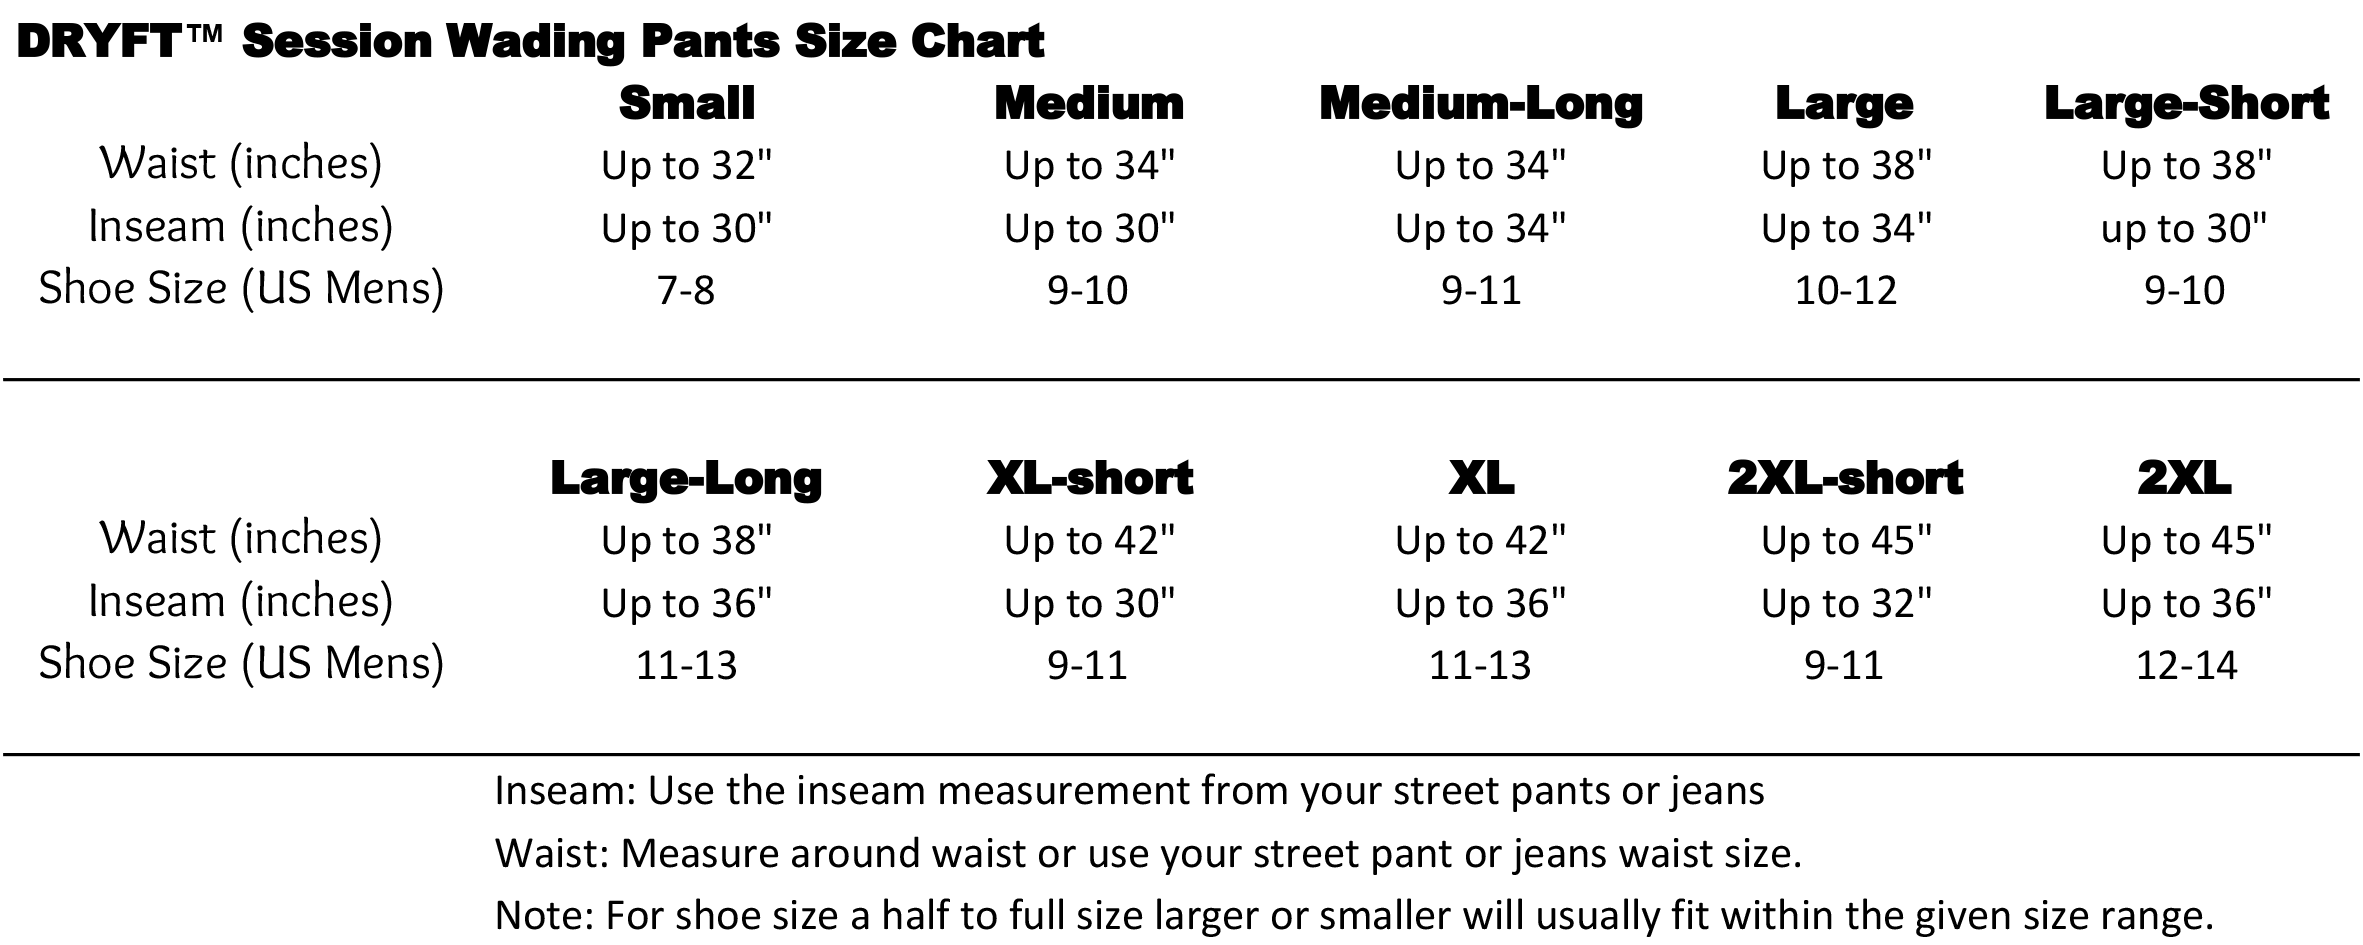 Pant Size Calculator - What Jeans Size am I